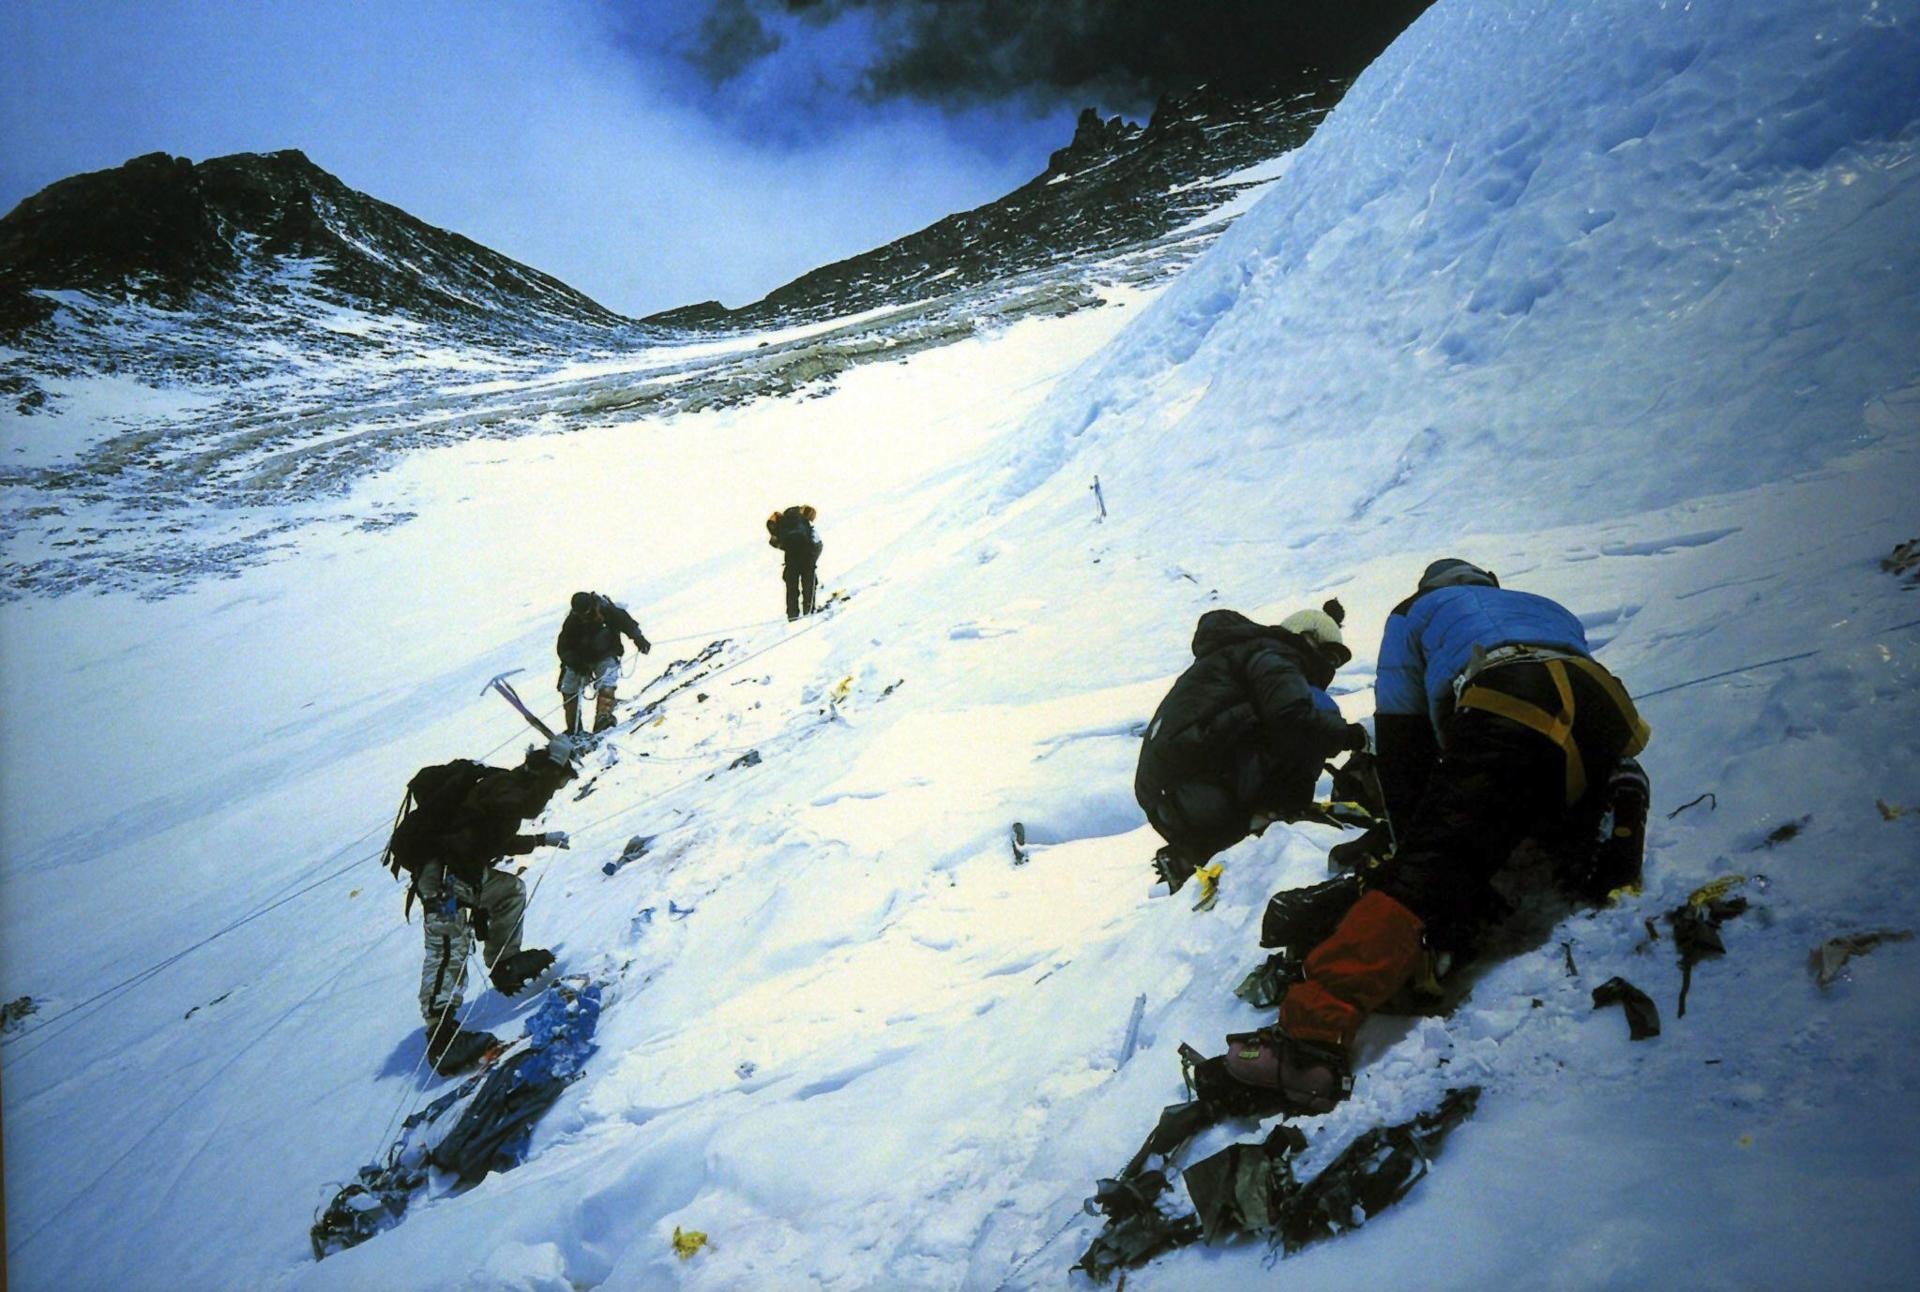 An undated handout picture showing members of Mount Everest Clean up expedition digging out tents from the snow on the Sagarmatha route on Mount Everest. EPA-PHOTO/EPA/FILE/HARISH TYAGI